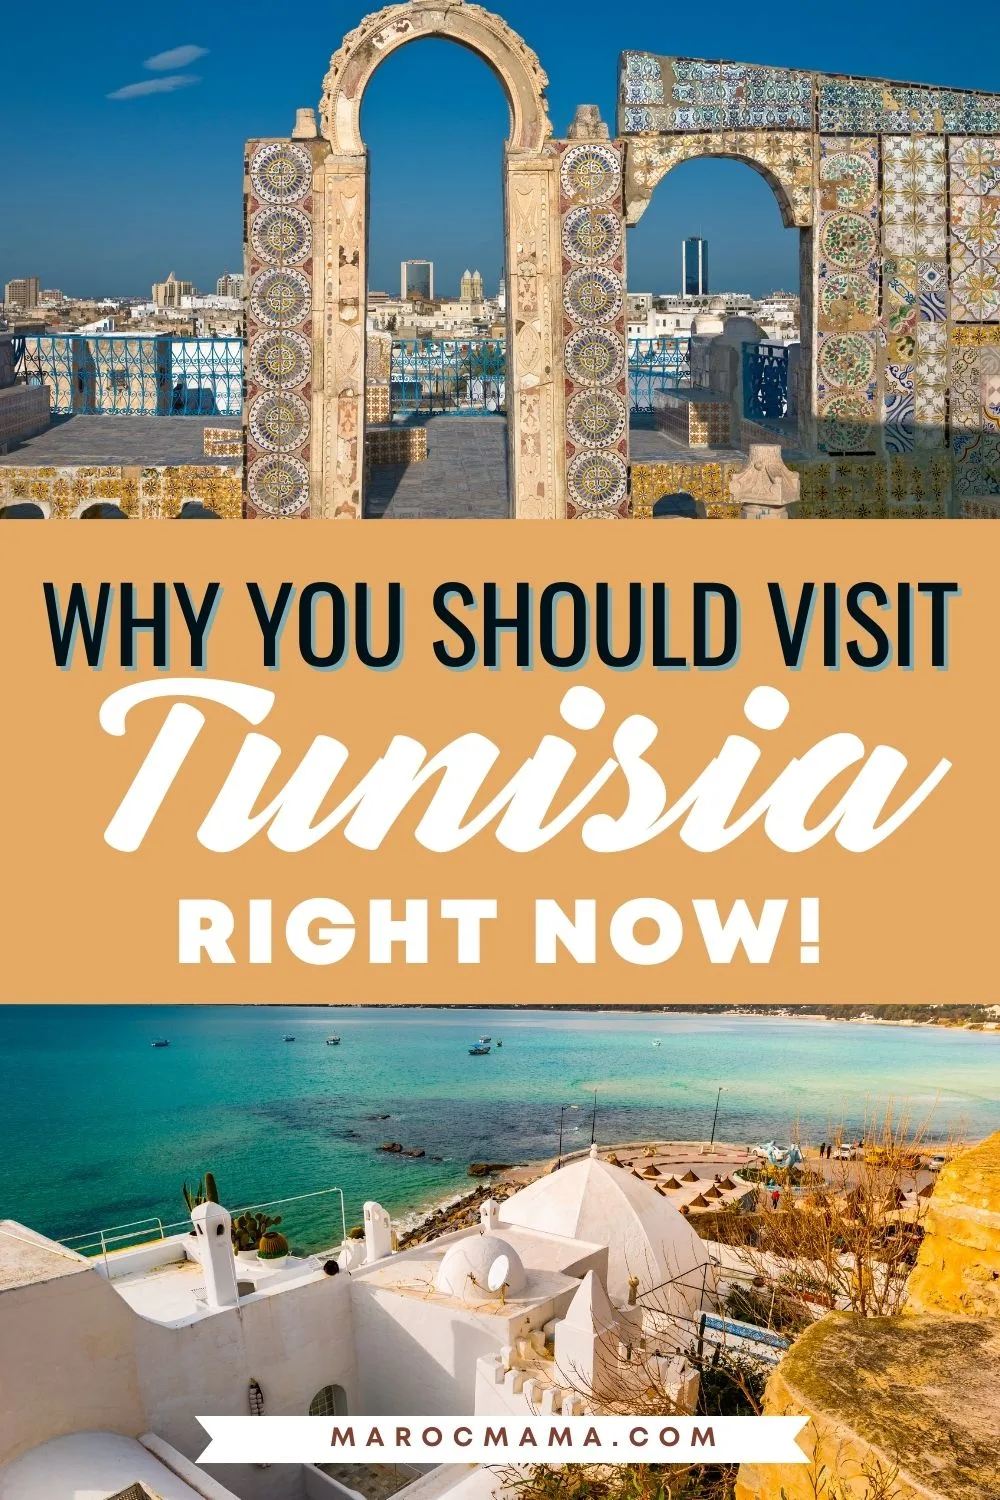 Why You Should Visit Tunisia Right Now! Top image is the Tunis Medina, and the bottom image is Hammamet.